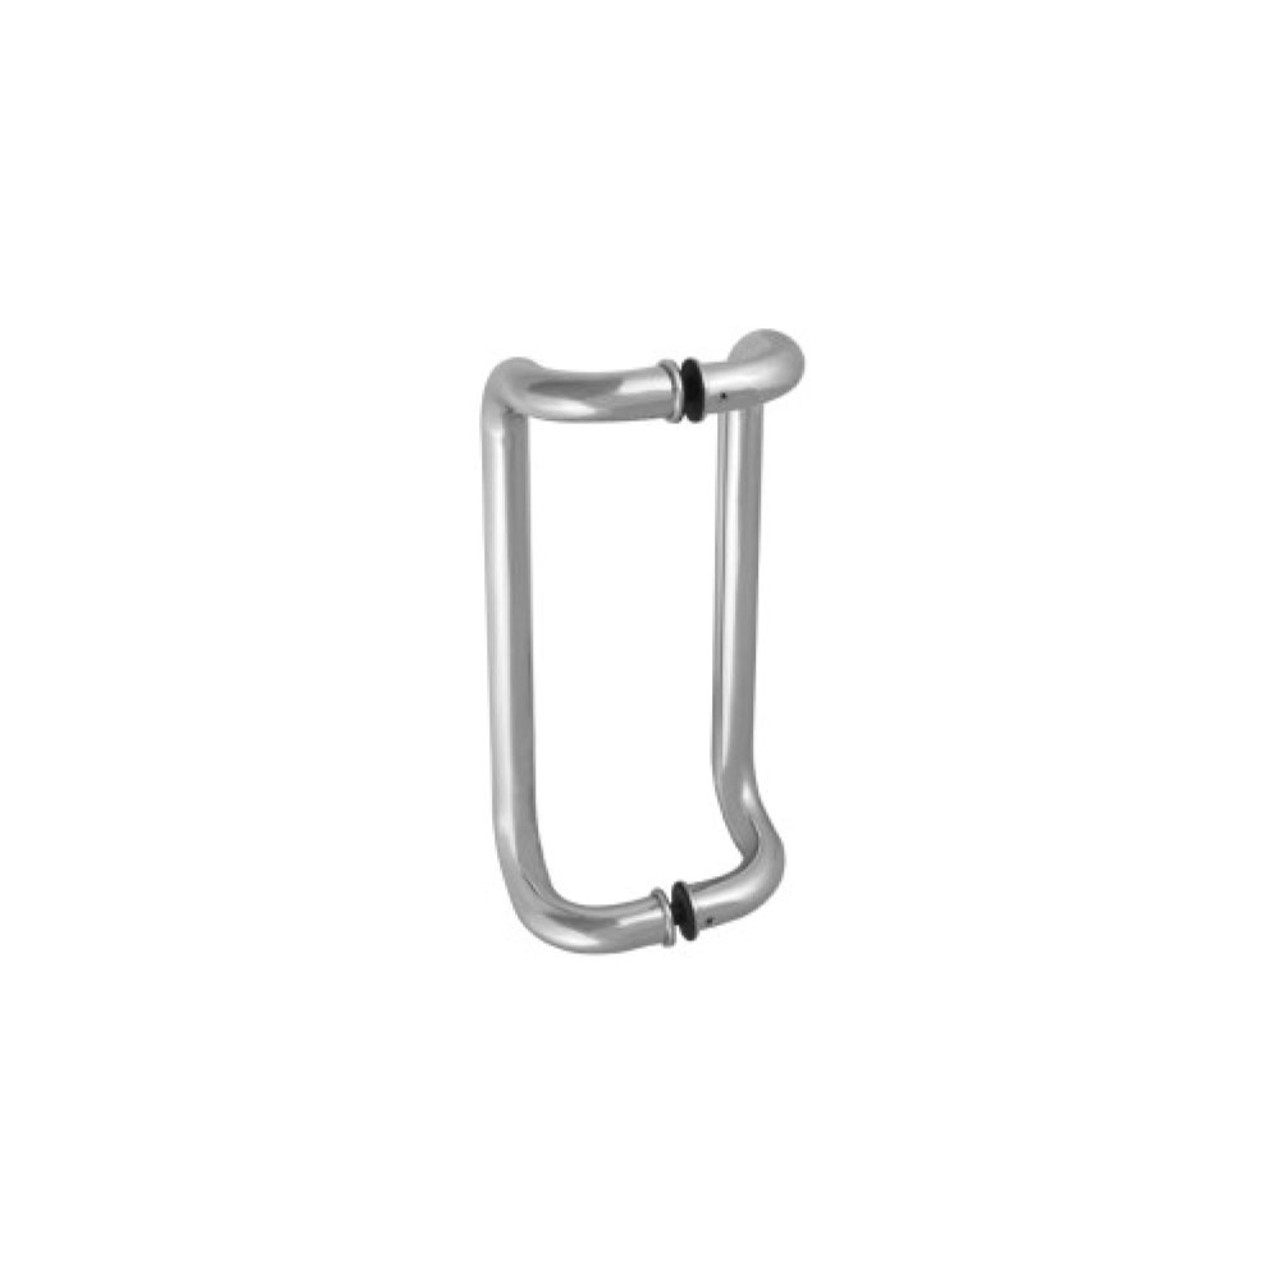 HOFF12x12  | Glass Mounted Standard Pull Handle